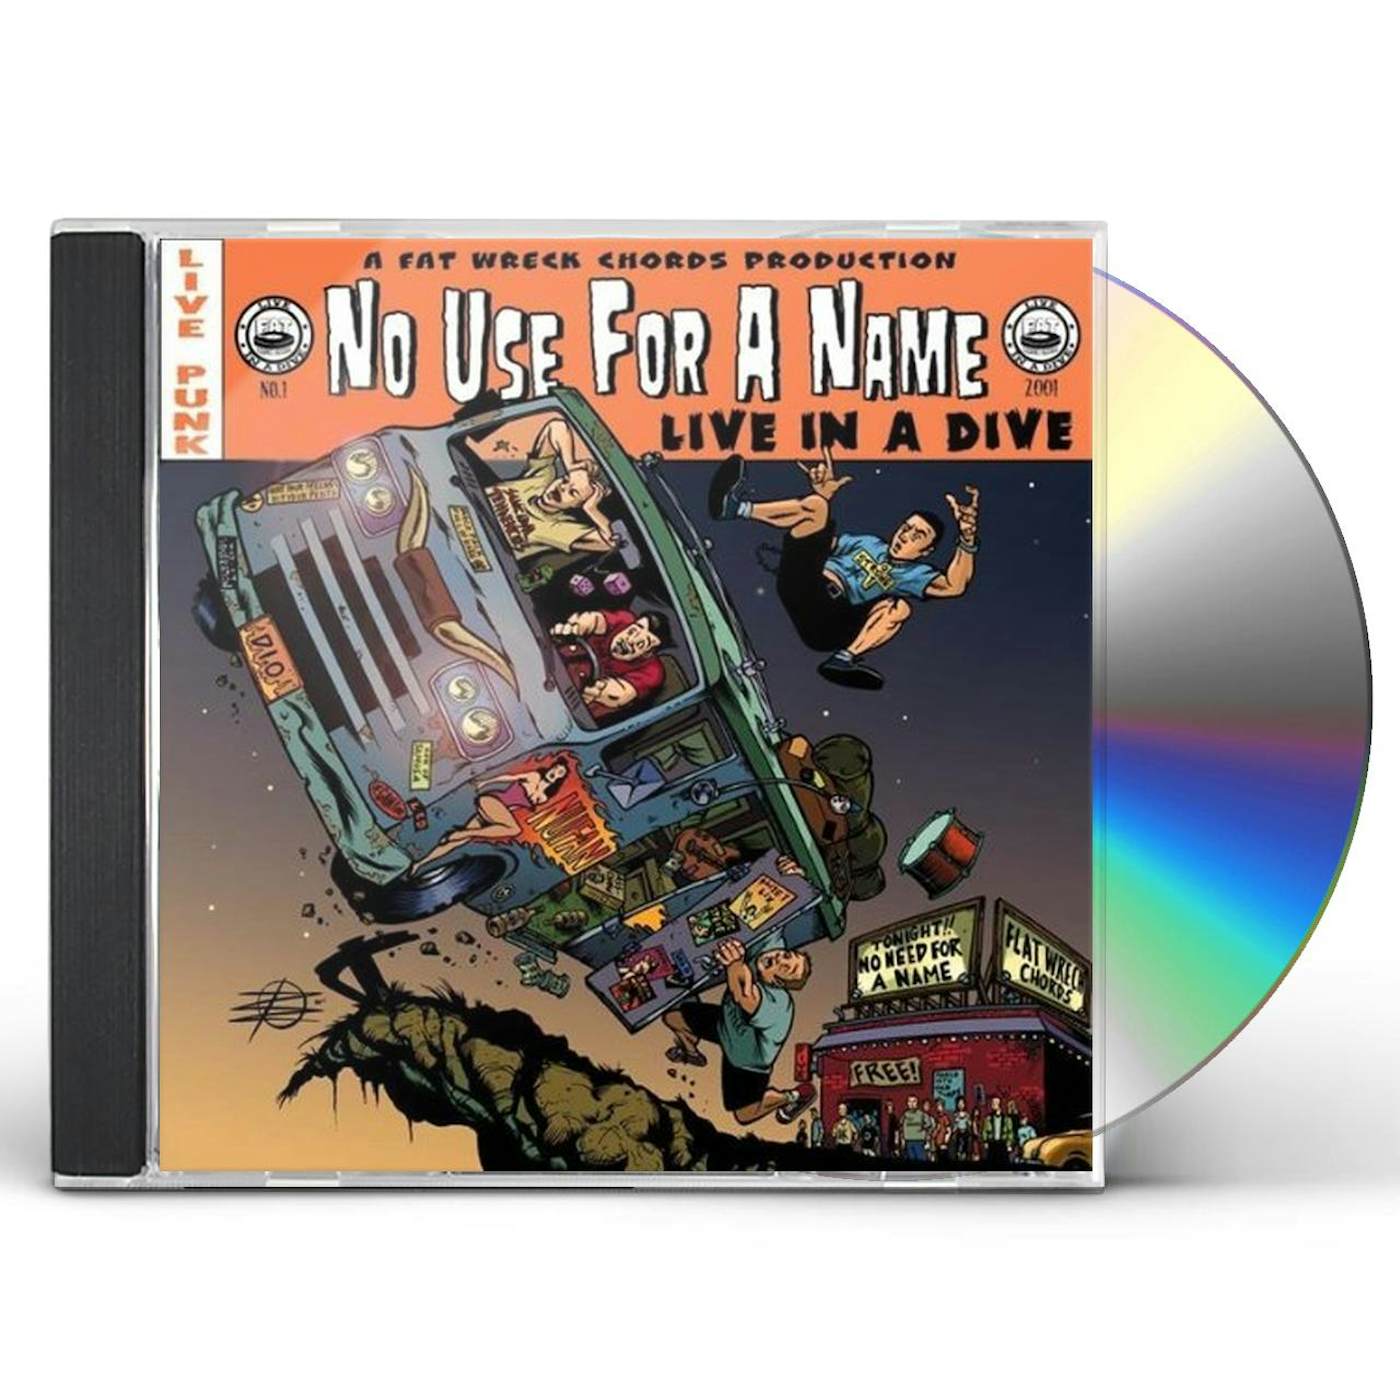 No Use For A Name LIVE IN A DIVE CD